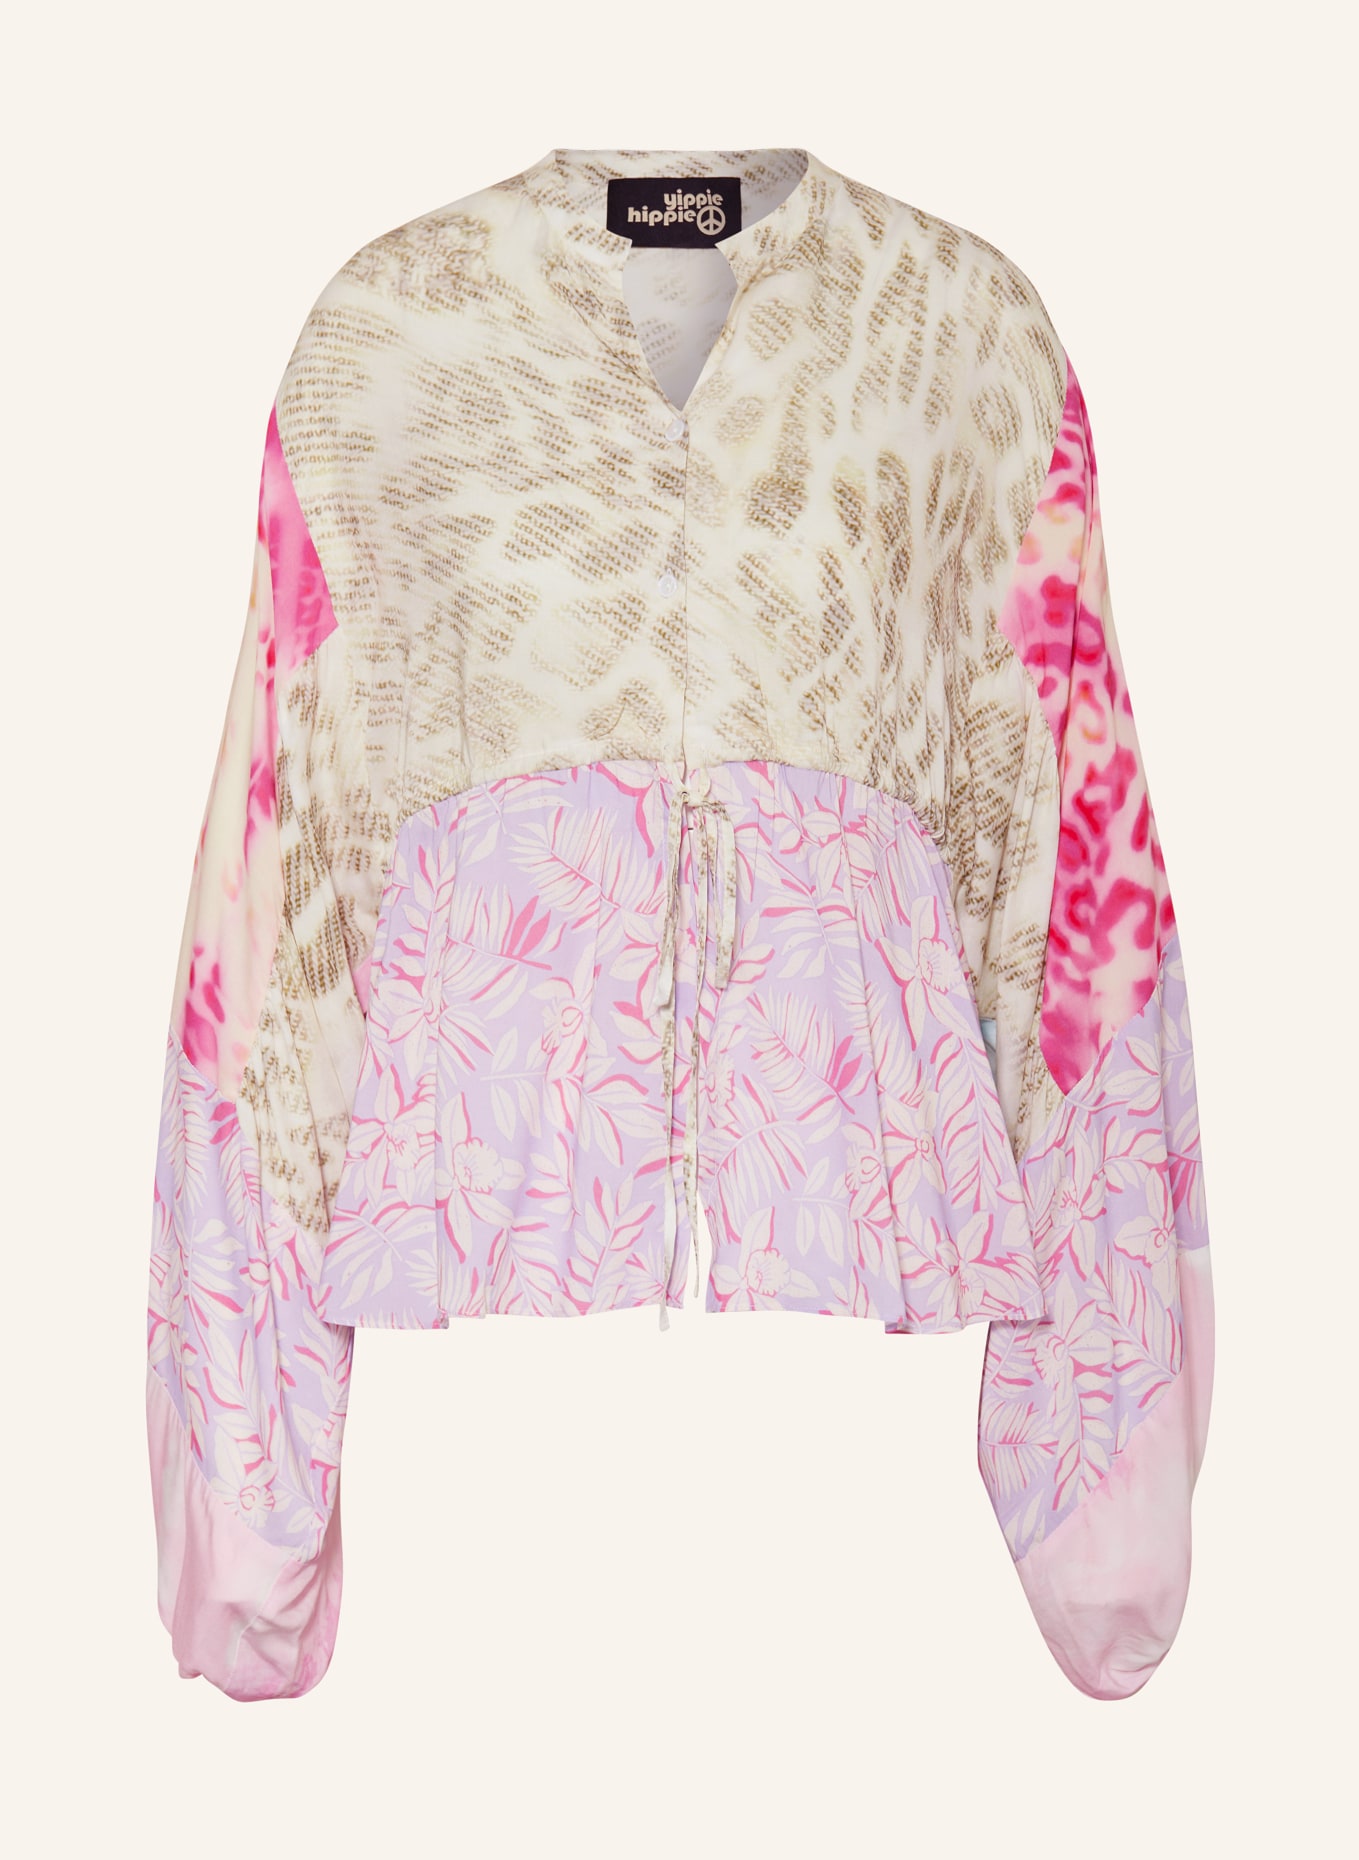 yippie hippie Shirt blouse, Color: PINK/ LIGHT PURPLE/ LIGHT PINK (Image 1)